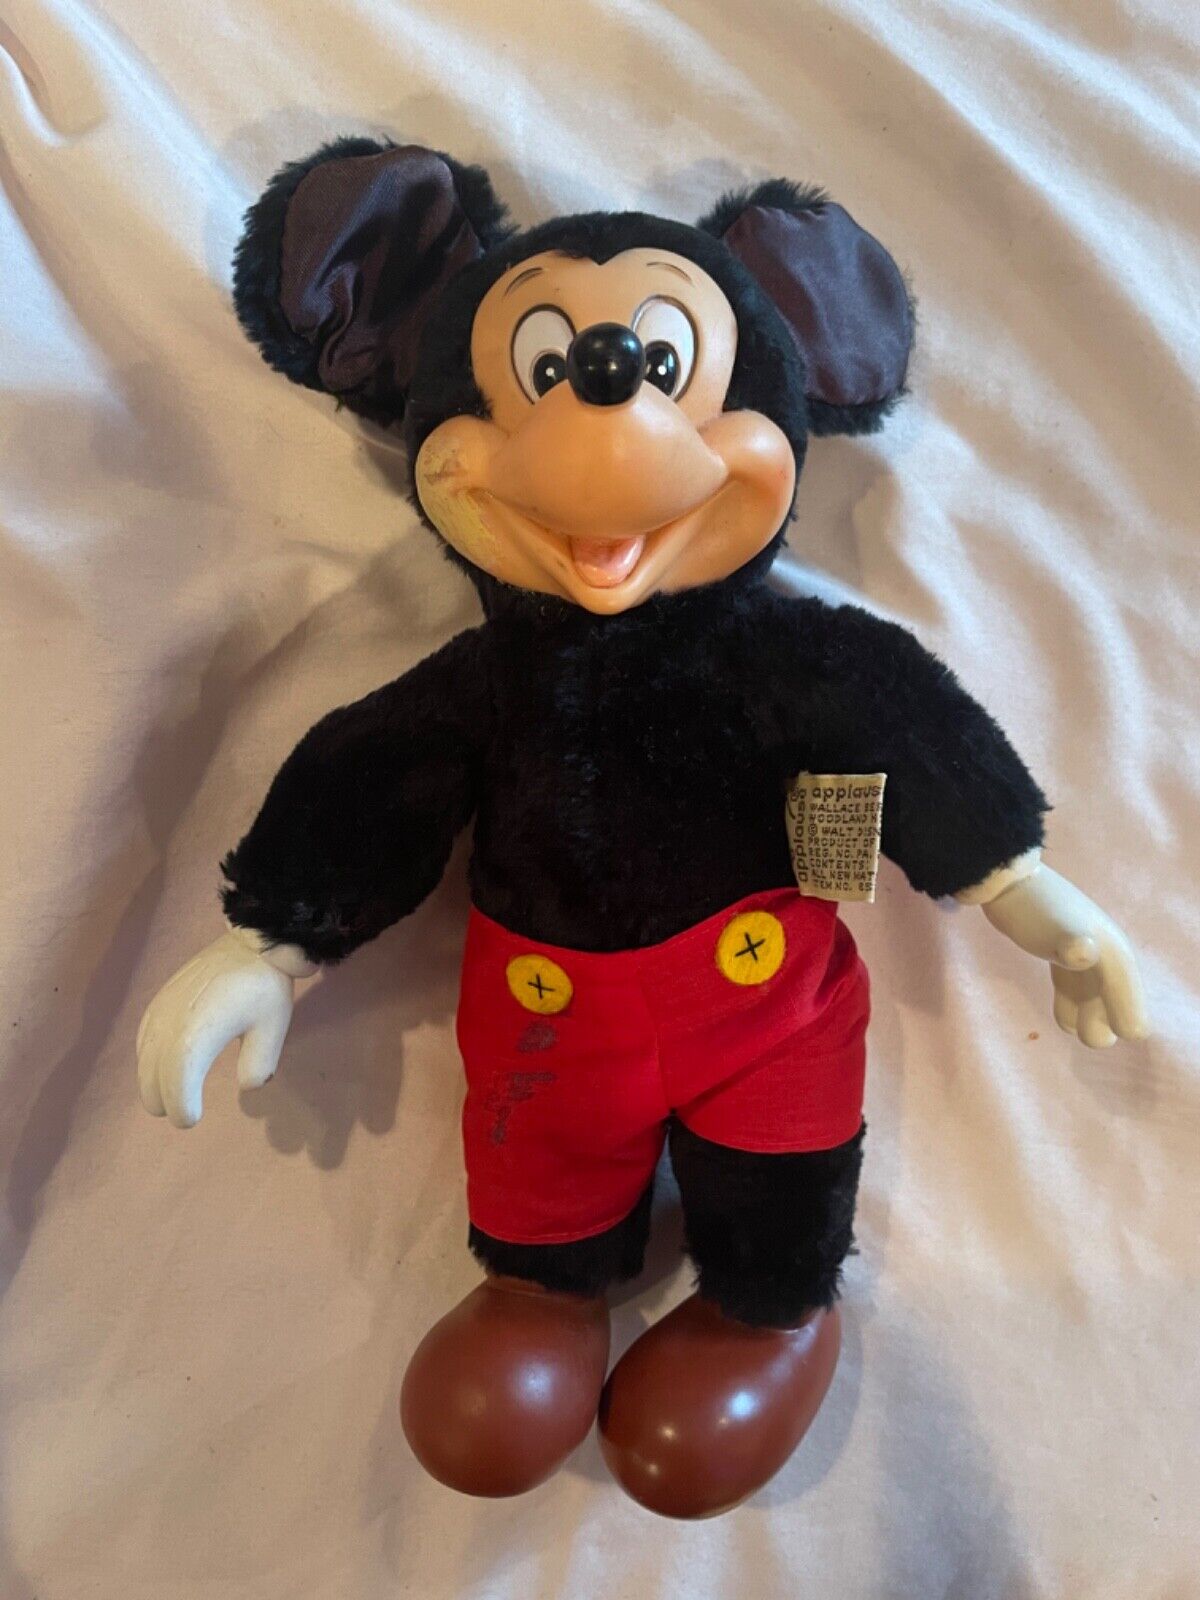 Vintage Applause Mickey Mouse Disney Plush Toy Hard Plastic Face Hands Shoes